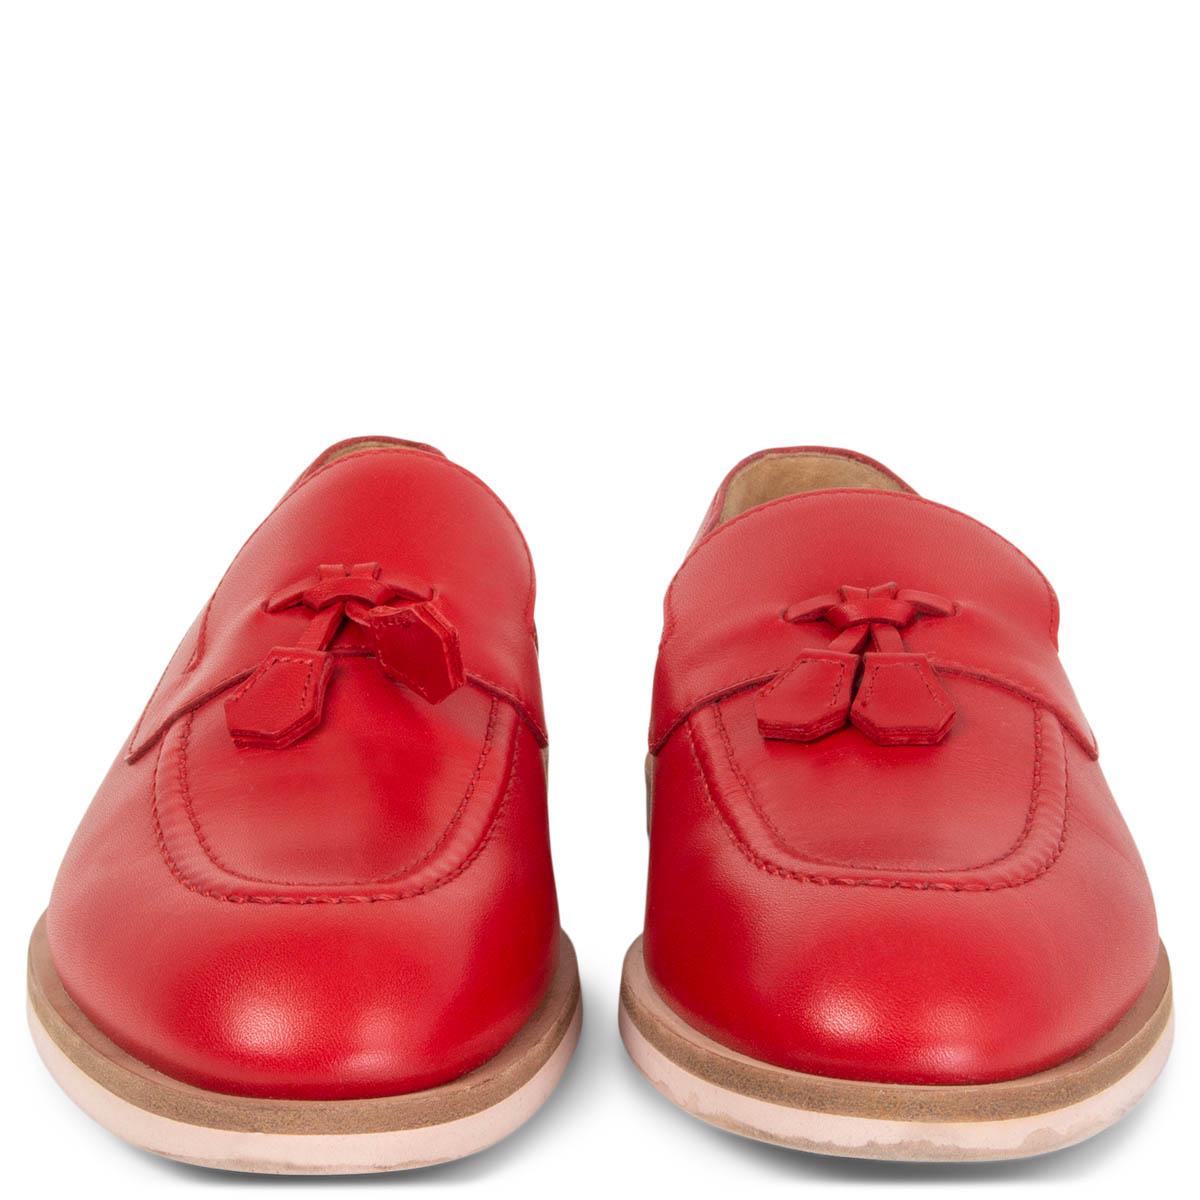 100% authentic Hermès tassel loafers in red calfskin and a beige stacked heel and sole. Have been worn and are in excellent condition. Come with dust bag. 

Measurements
Imprinted Size	36
Shoe Size	36
Inside Sole	23.5cm (9.2in)
Width	7.5cm